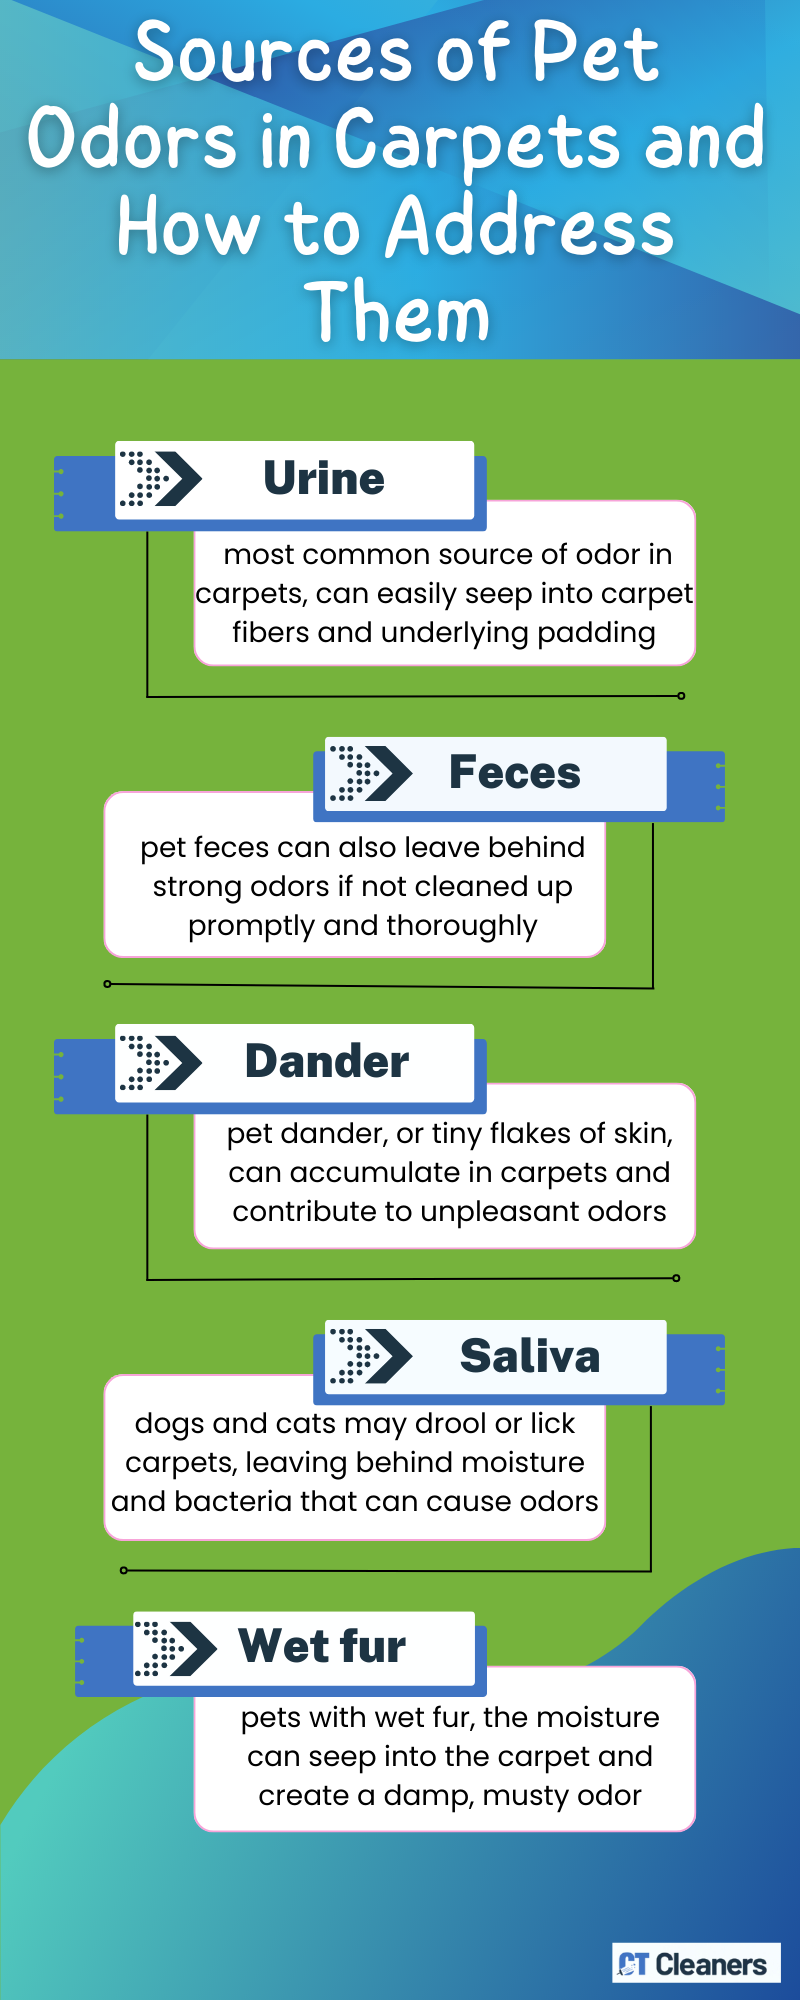 Sources of Pet Odors in Carpets and How to Address Them